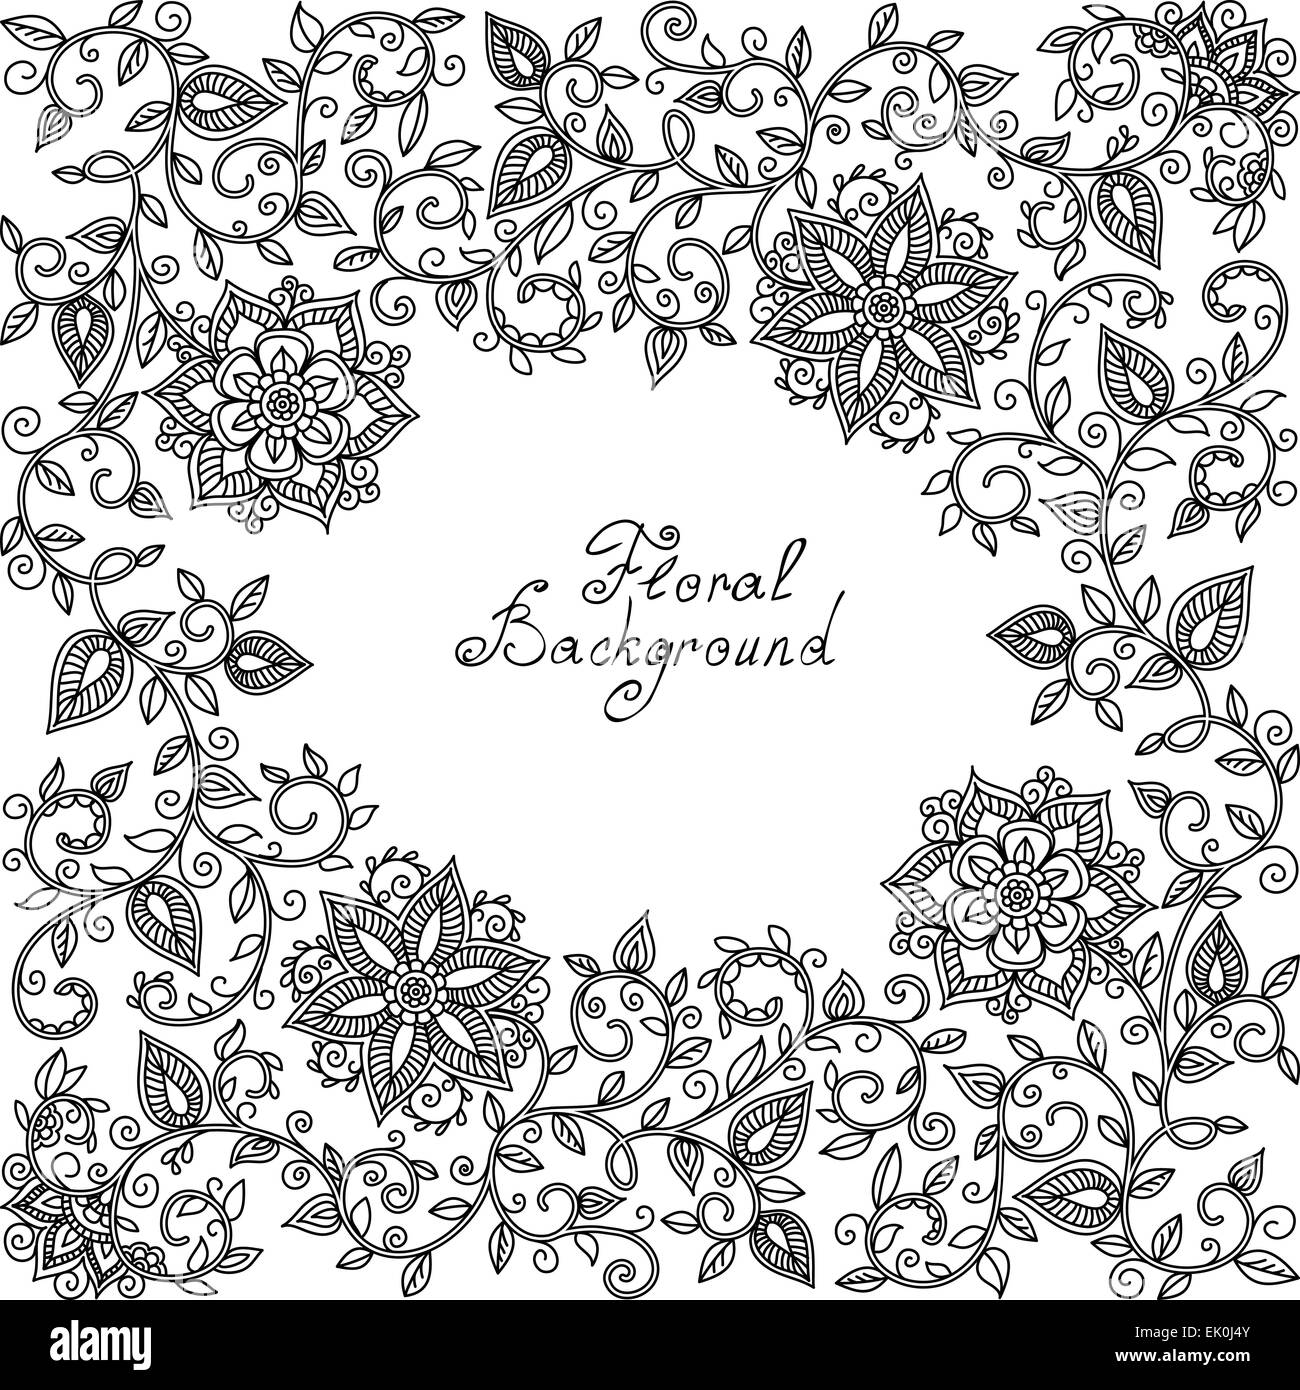 vector black and white floral pattern Stock Photo